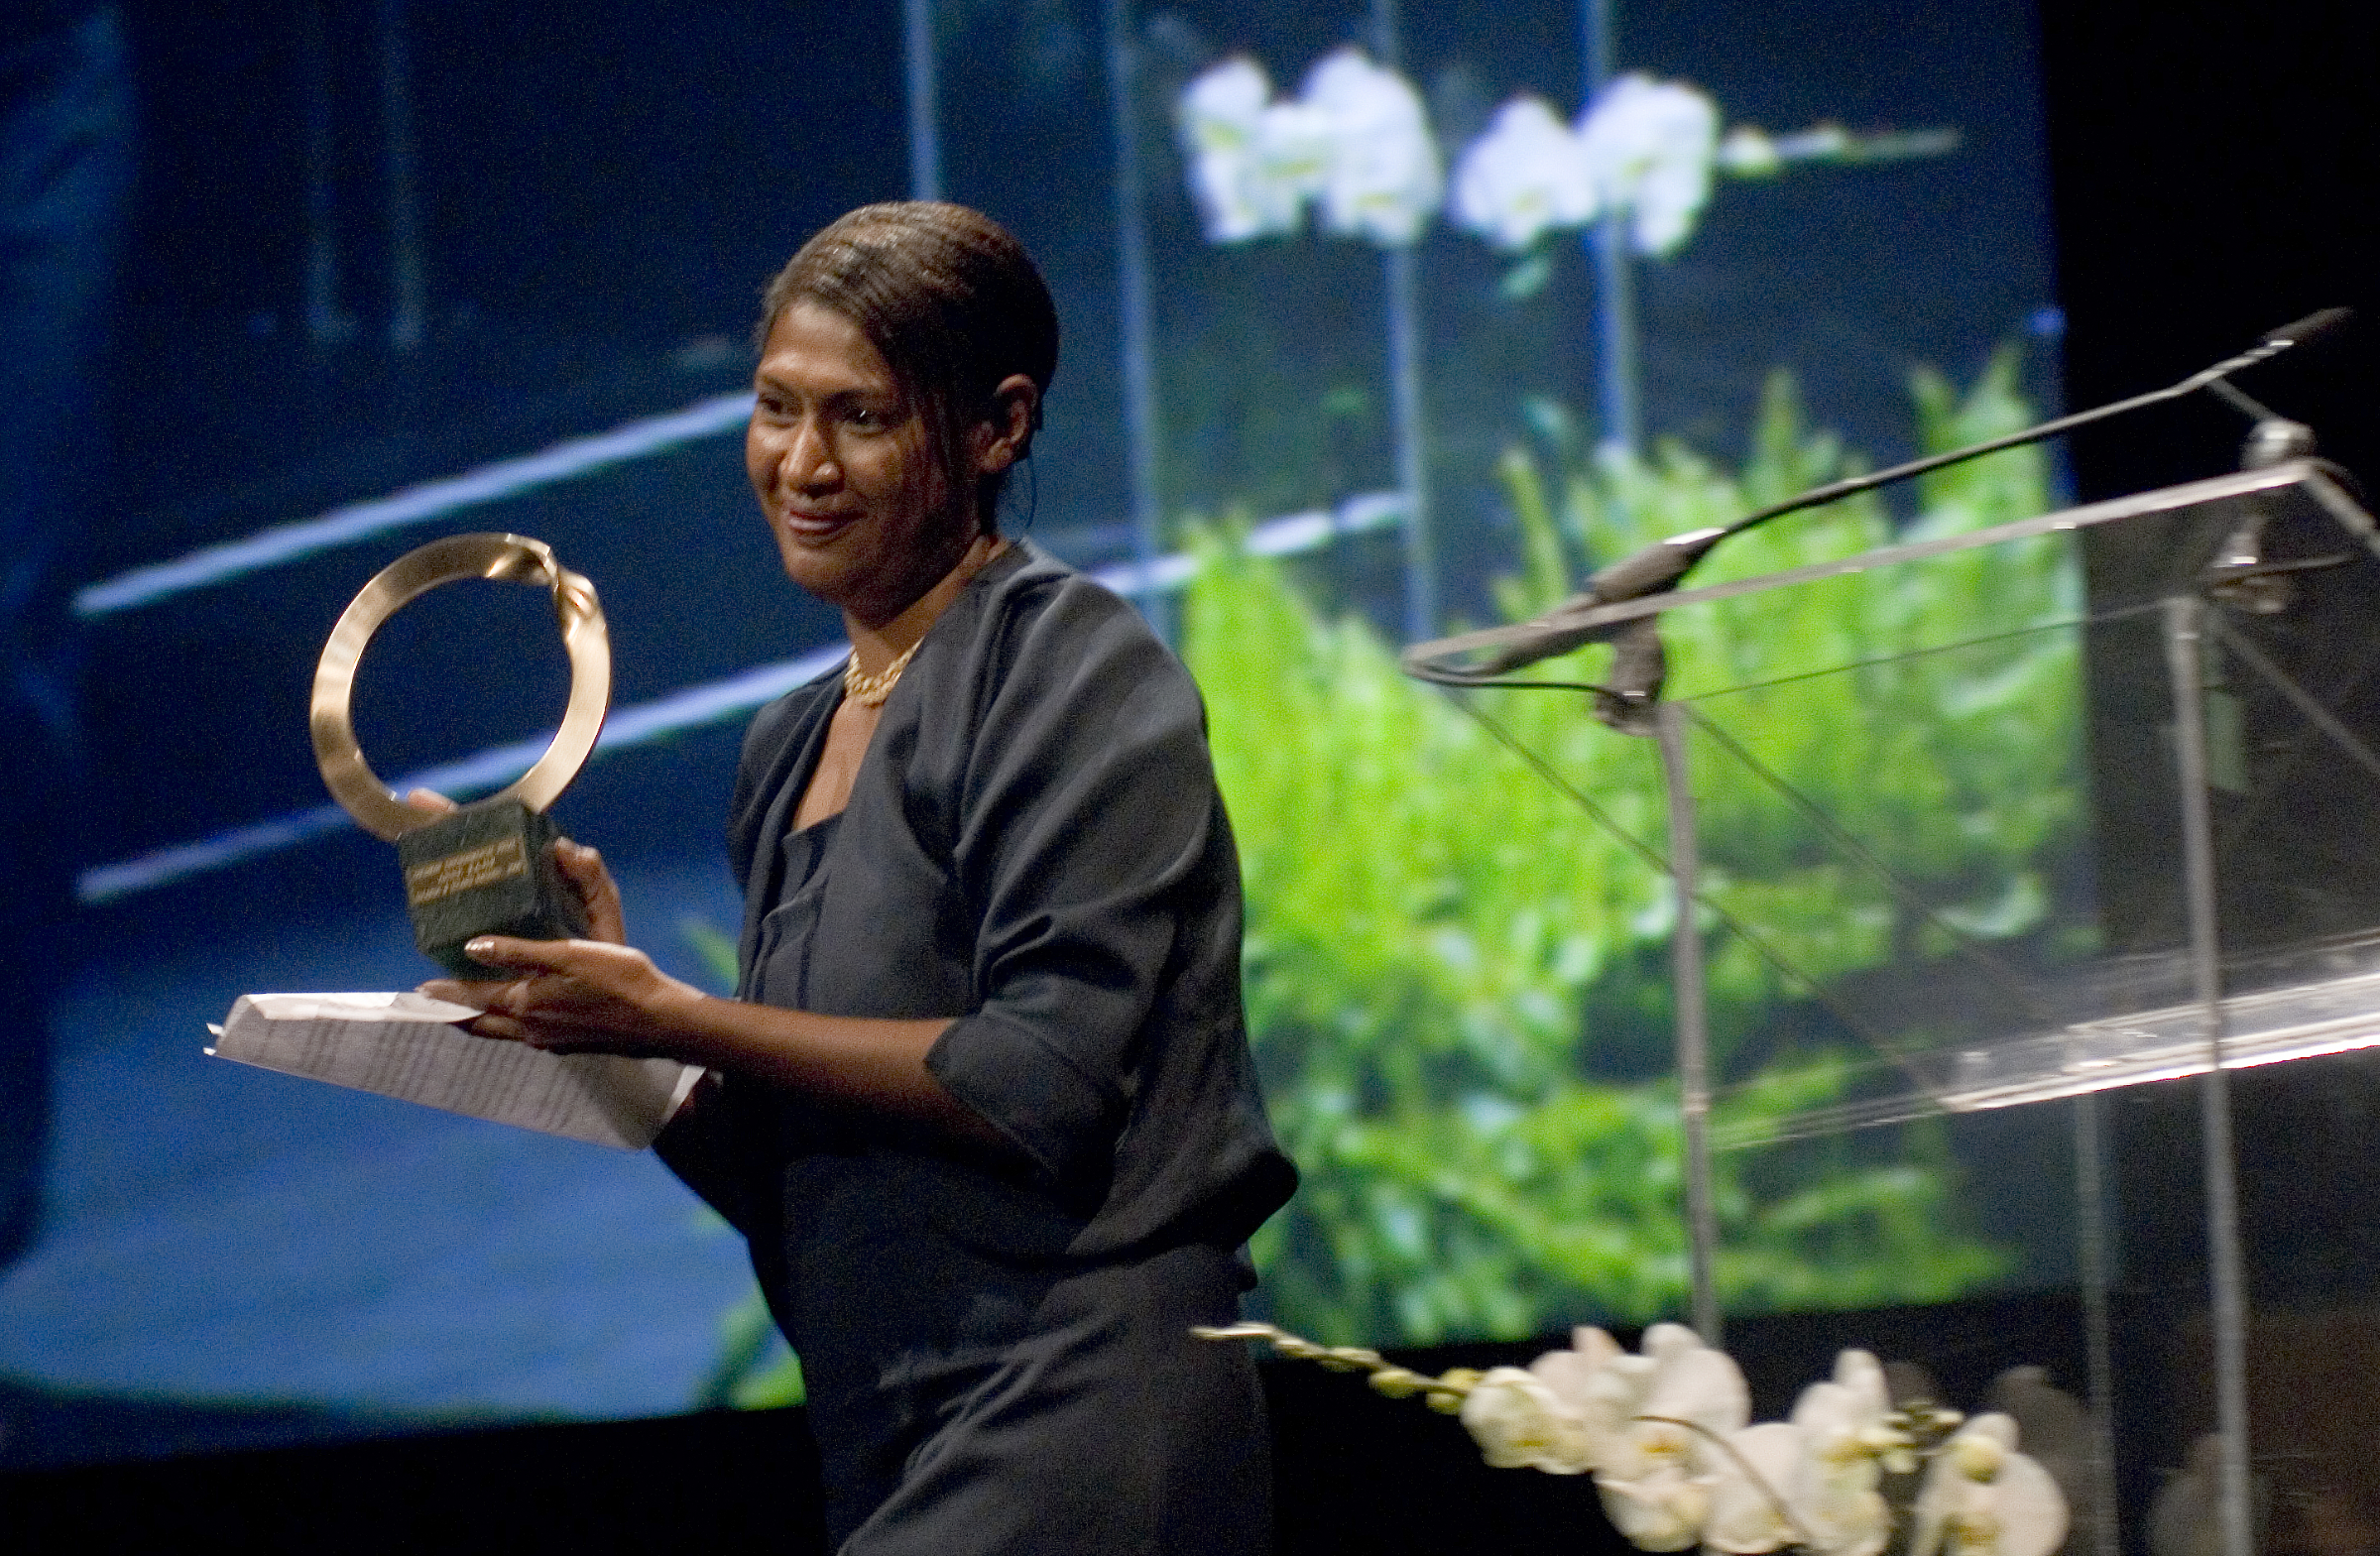 Papua New Guinea attorney Anne Kajir wins a lawsuit against a global timber company that must pay back Indigenous landowners. Image credit: Courtesy of Goldman Prize